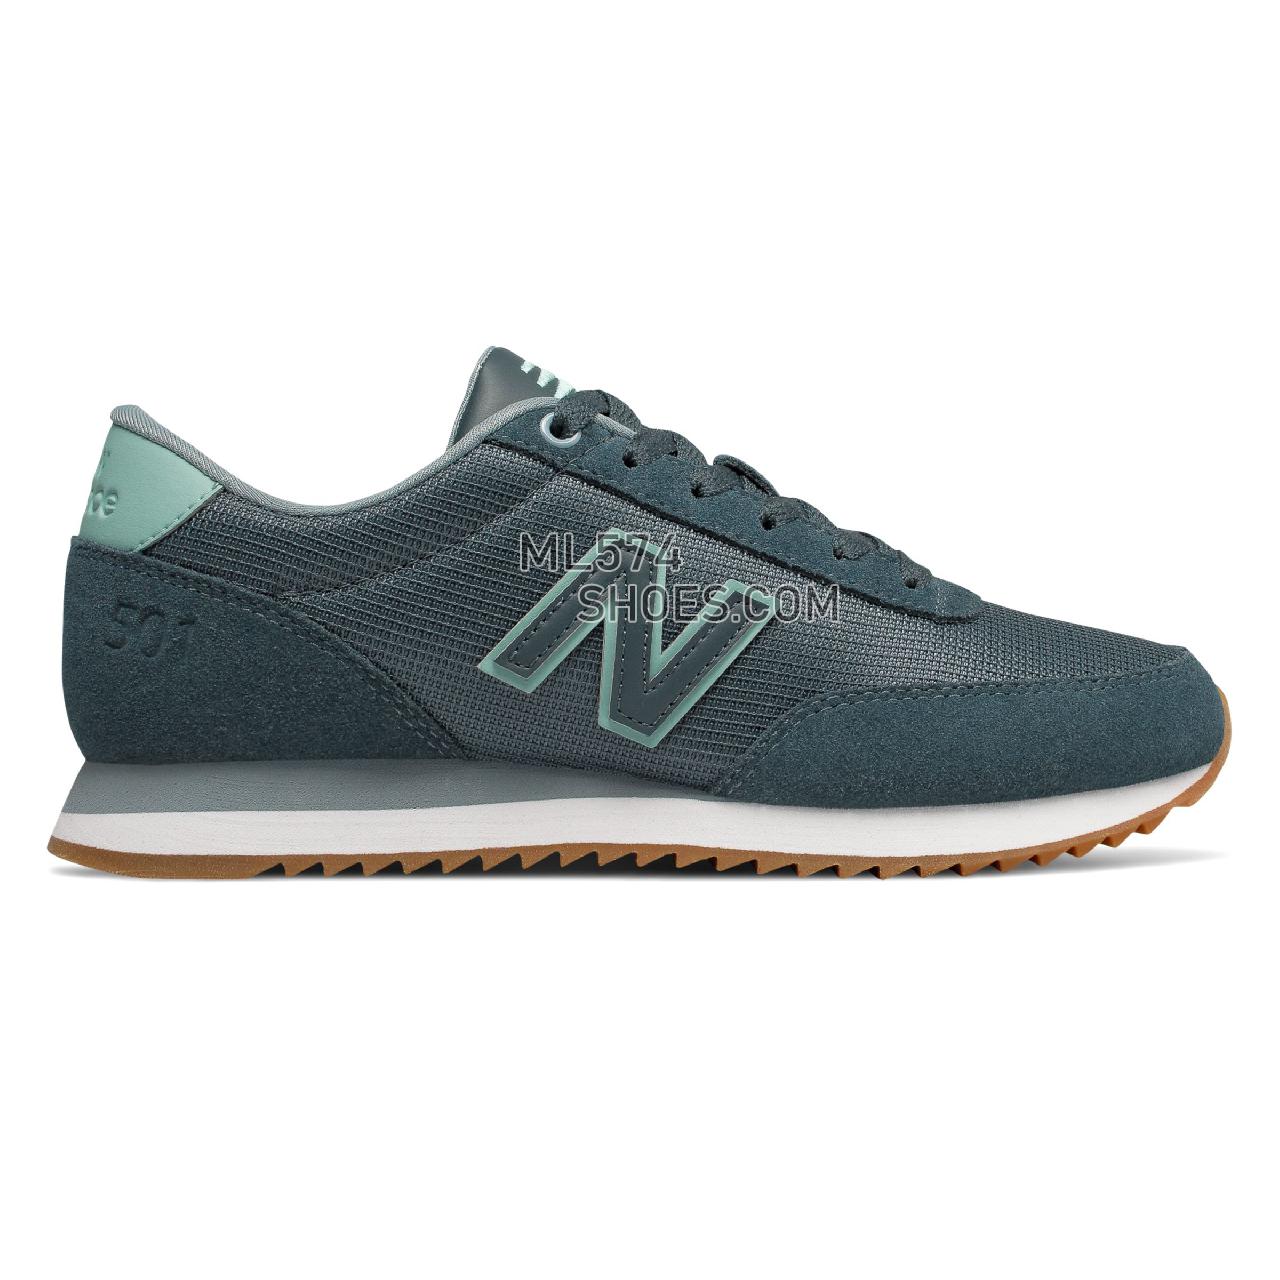 New Balance 501 - Women's 501 - Classic Petrol with Mineral Sage - WZ501MSC